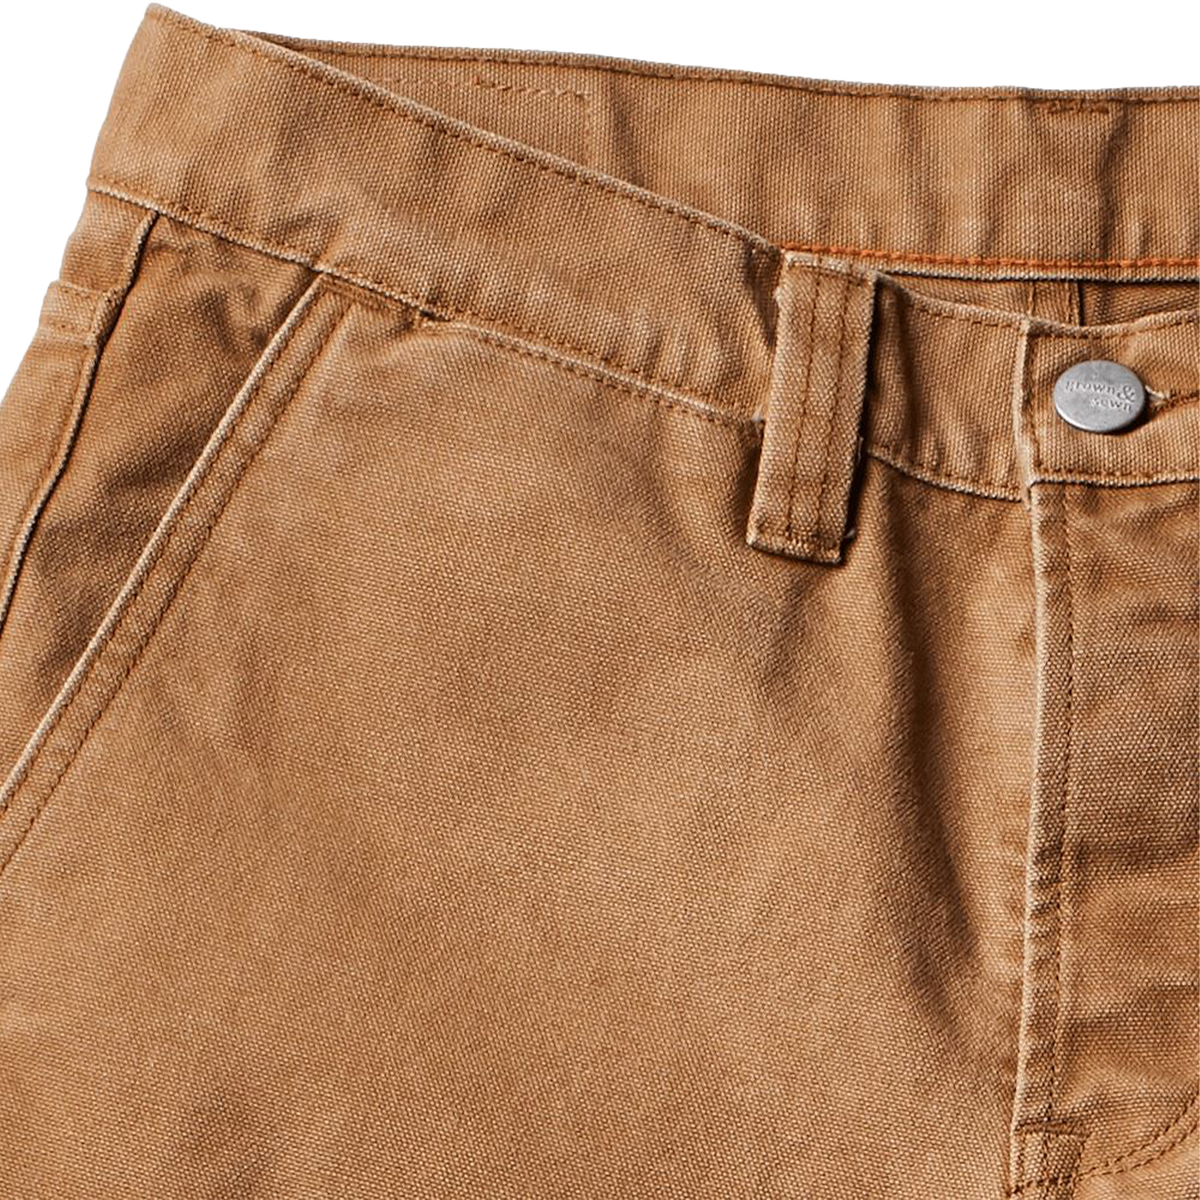 Foundation Canvas Pant - 12 oz. - Camel  ONLY  33, 31